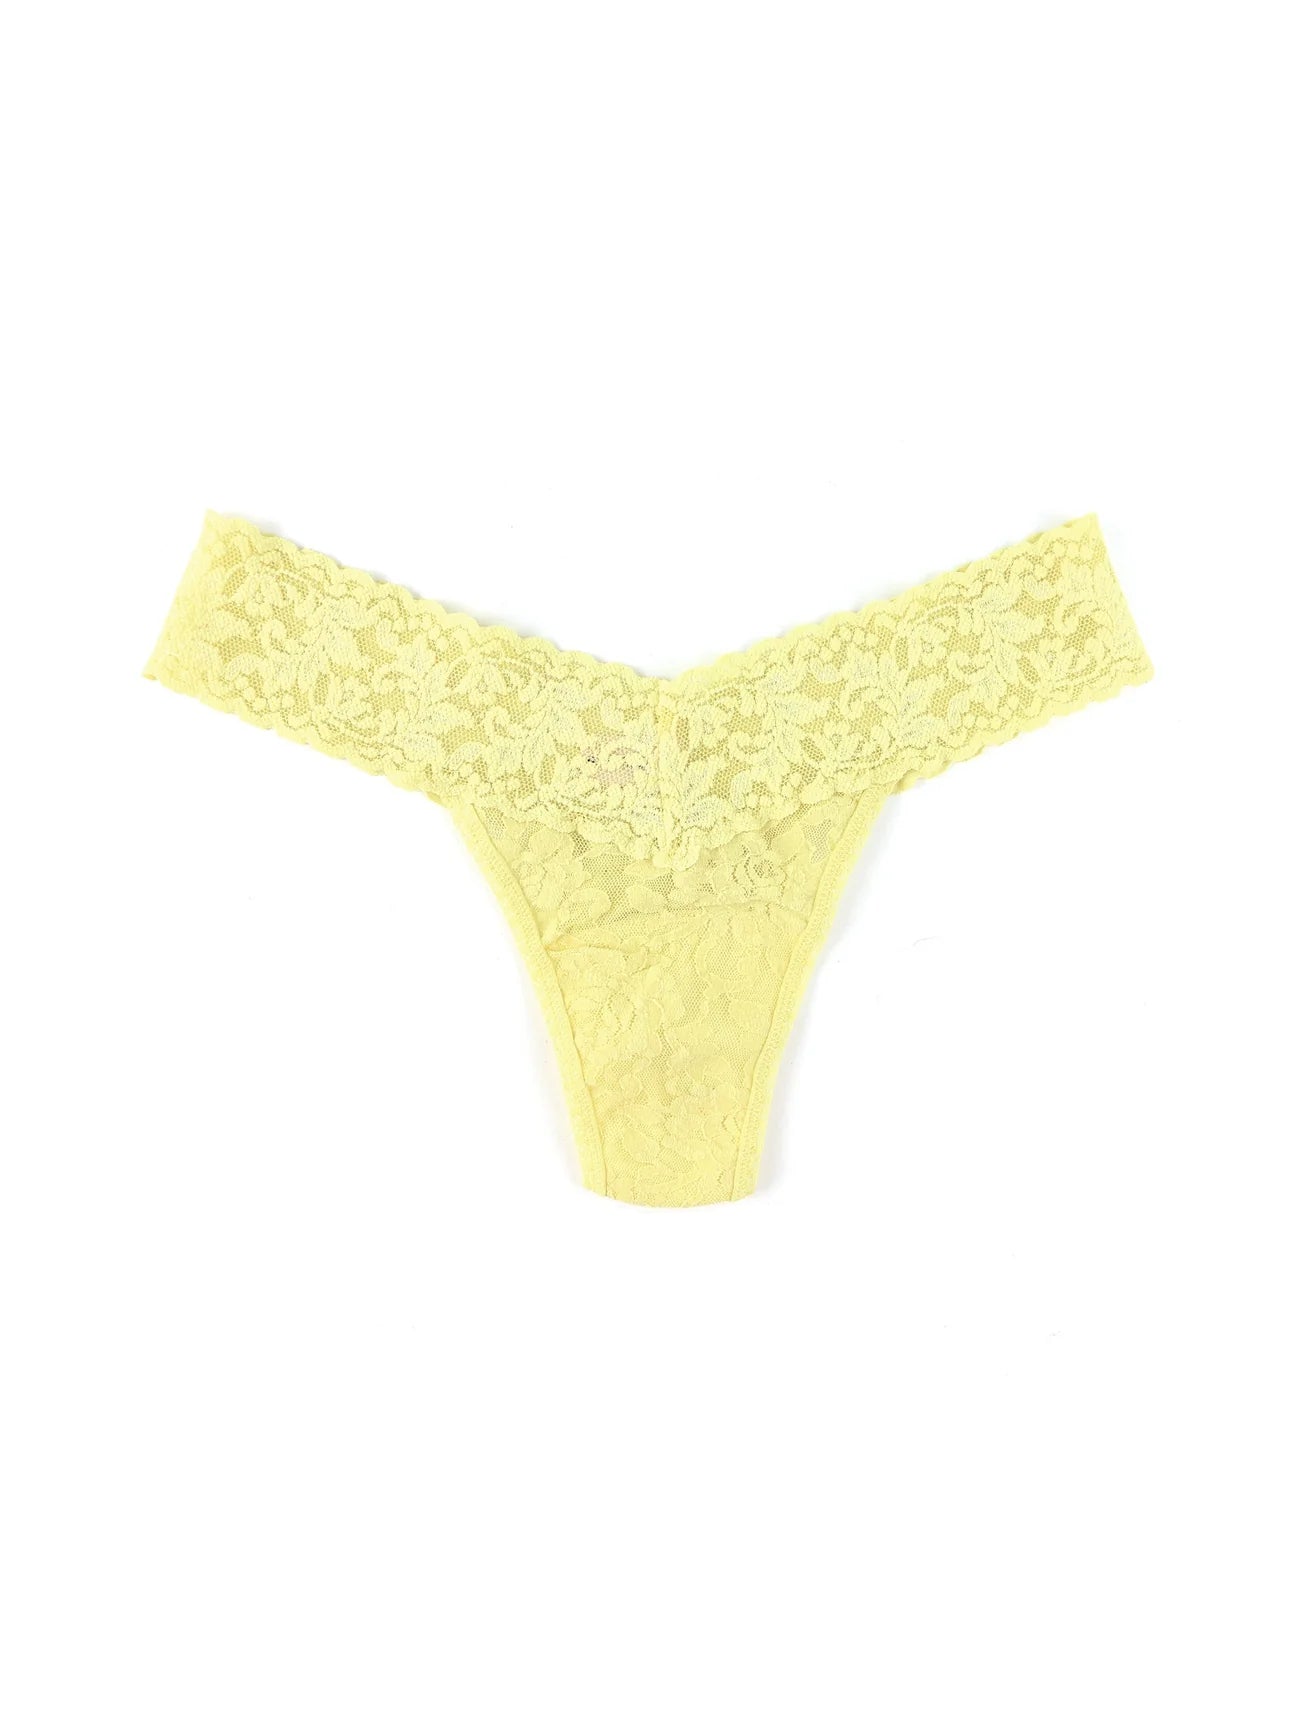 Lacy Low-Rise Panties